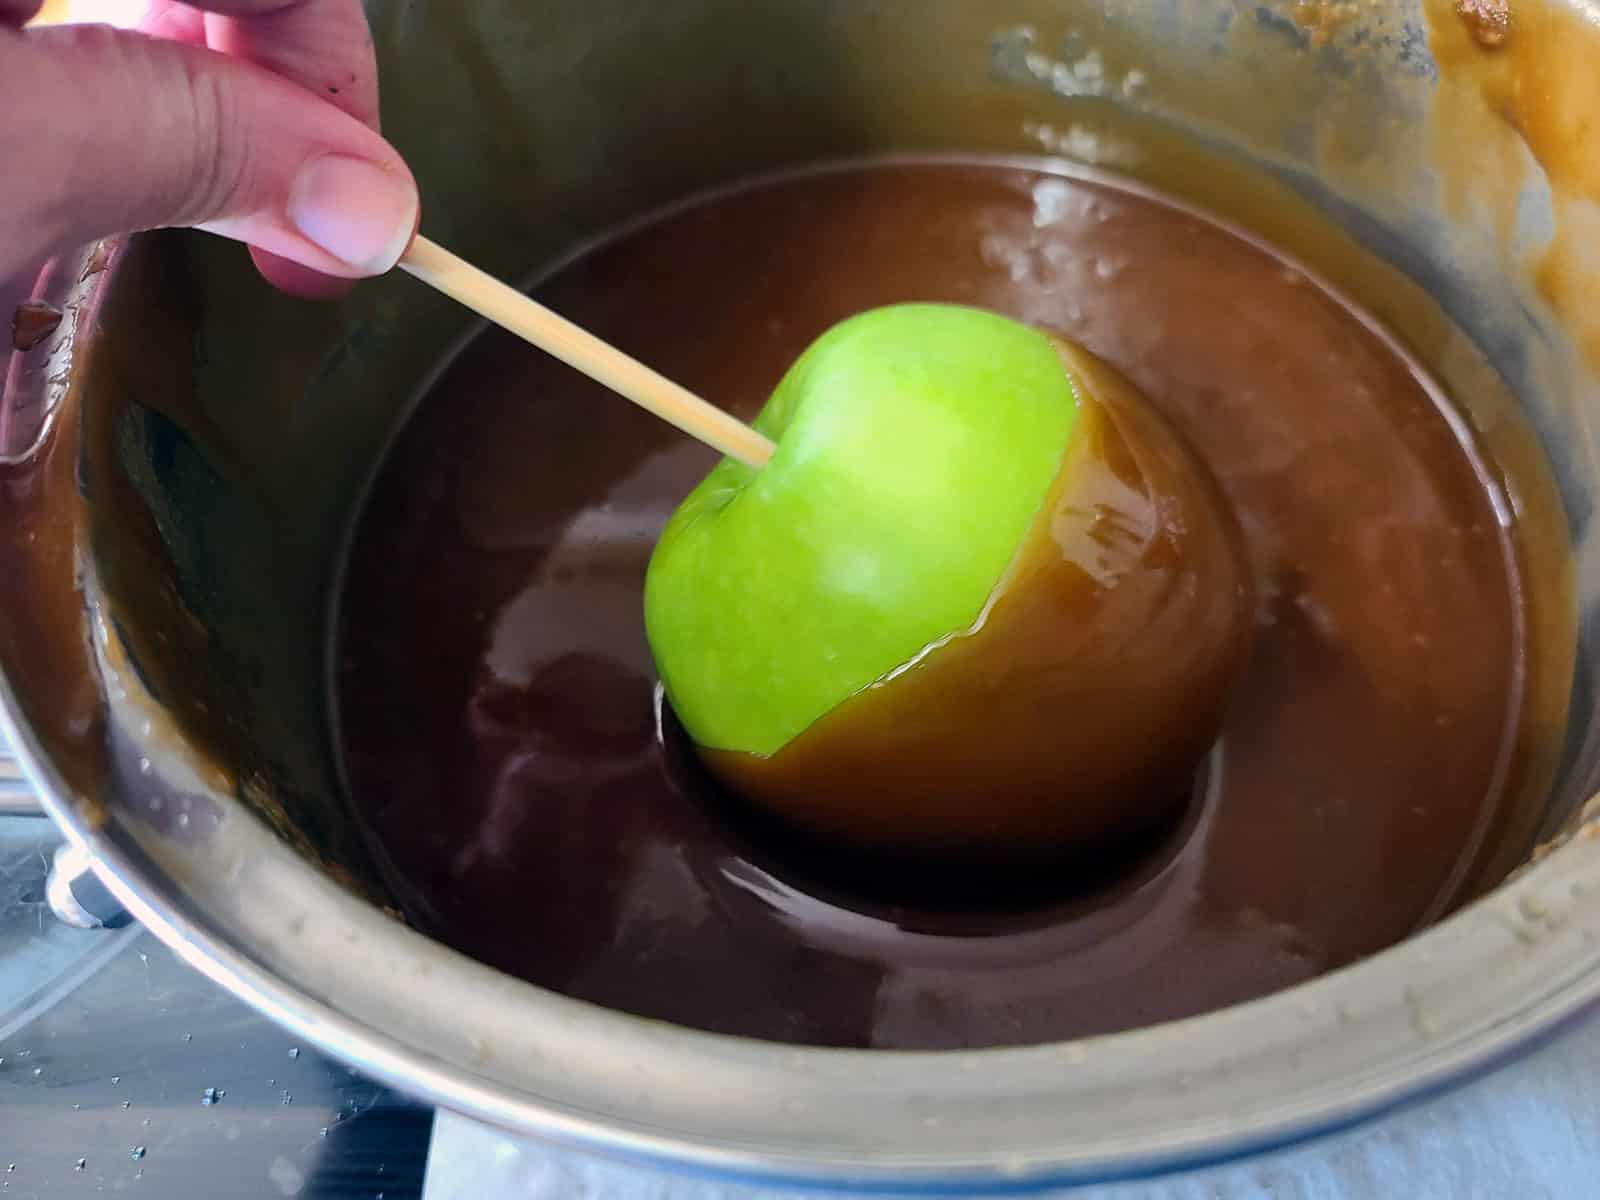 A green apple is being dipped in maple caramel.